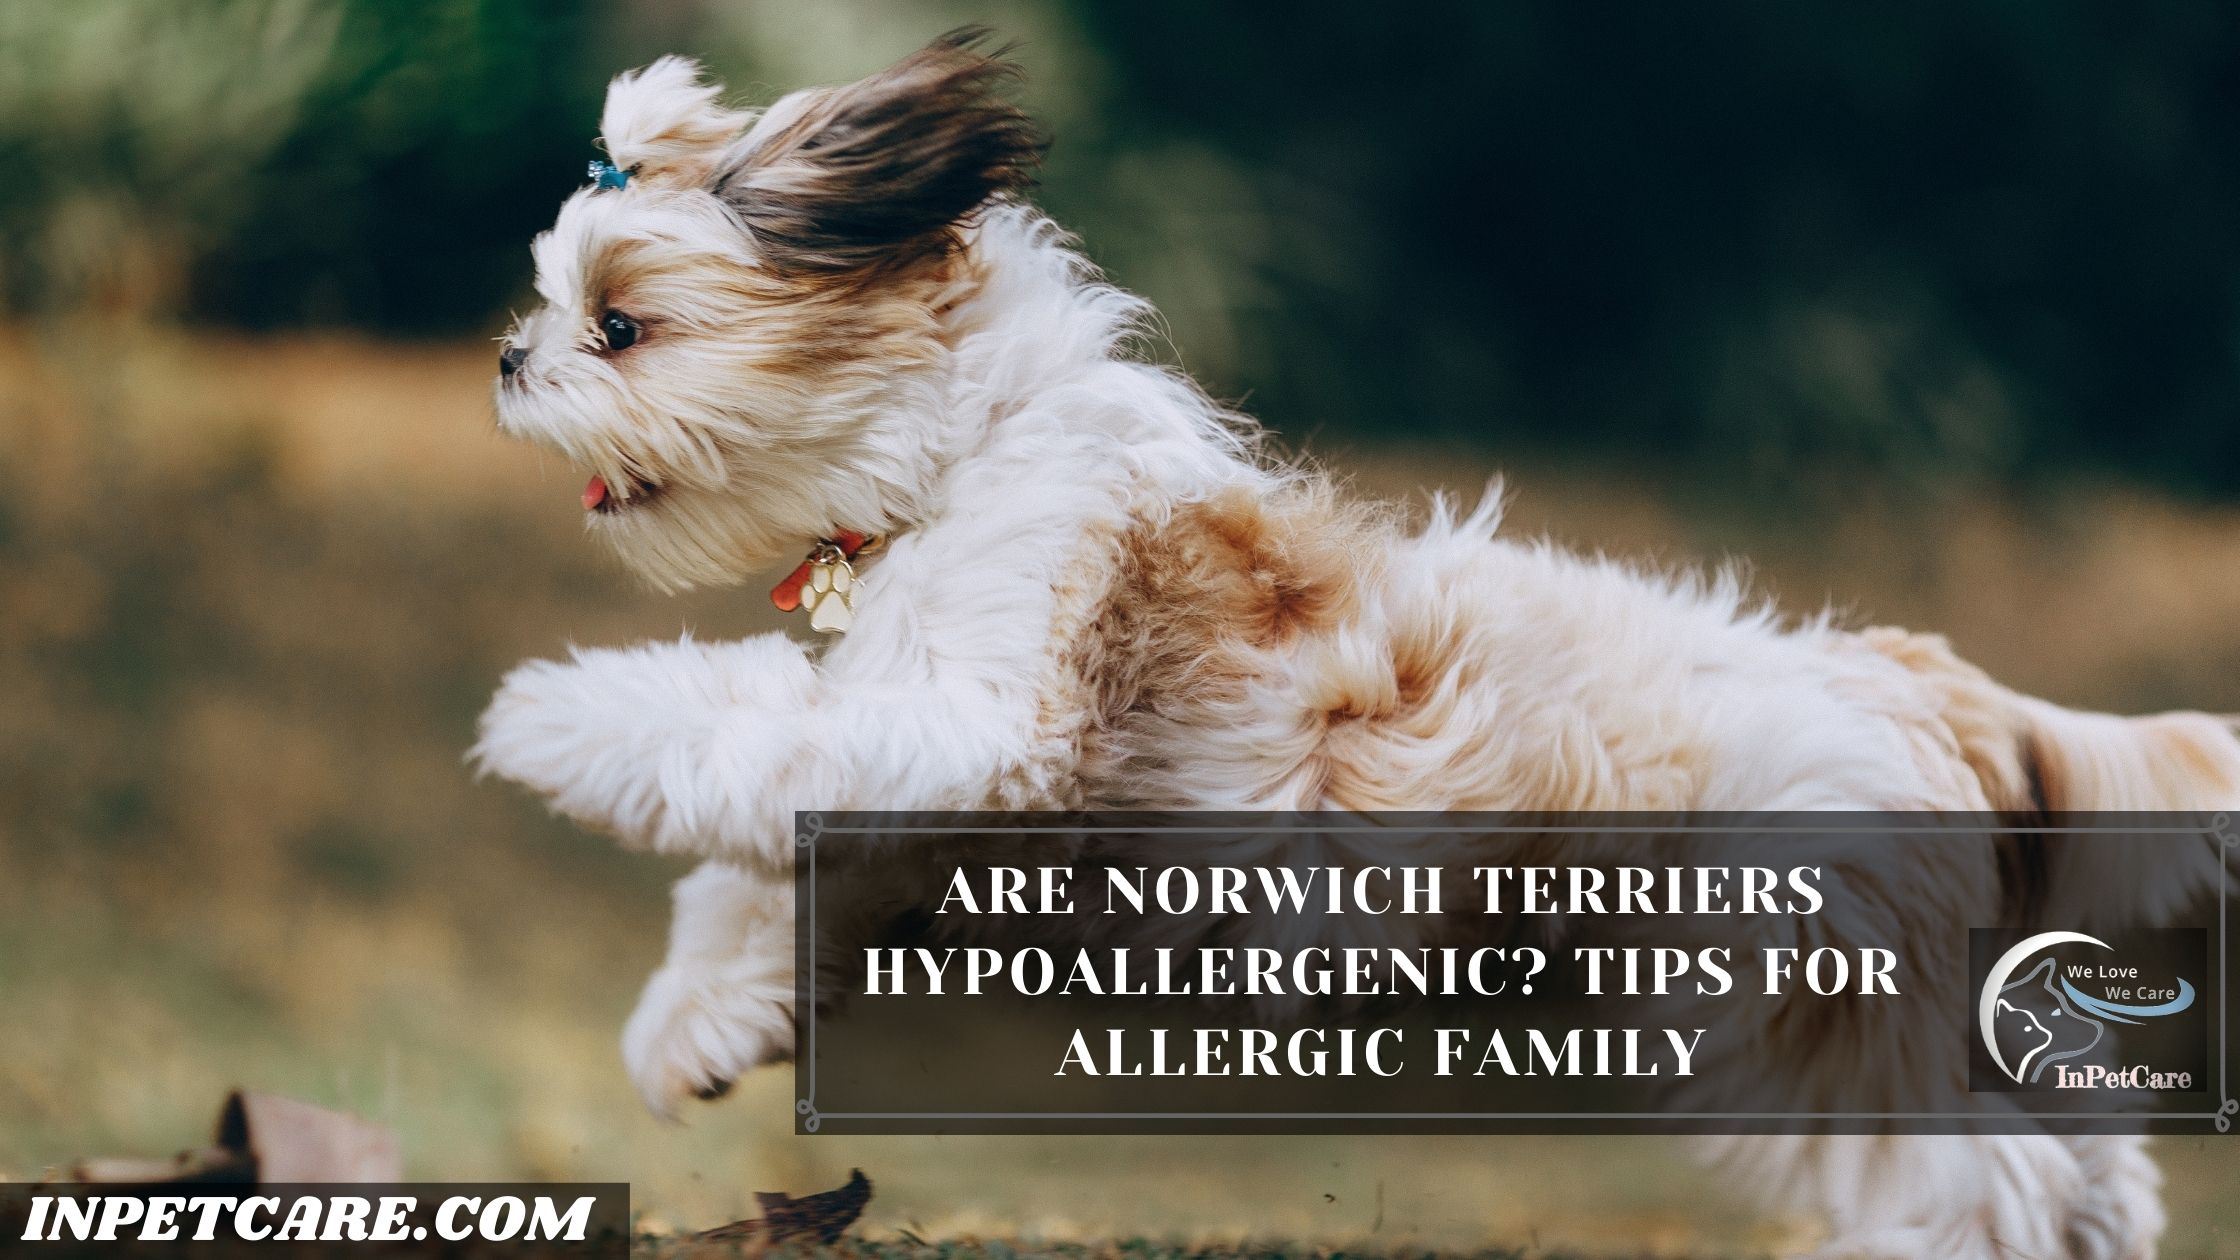 Are Norwich Terriers Hypoallergenic? Tips For Allergic Family